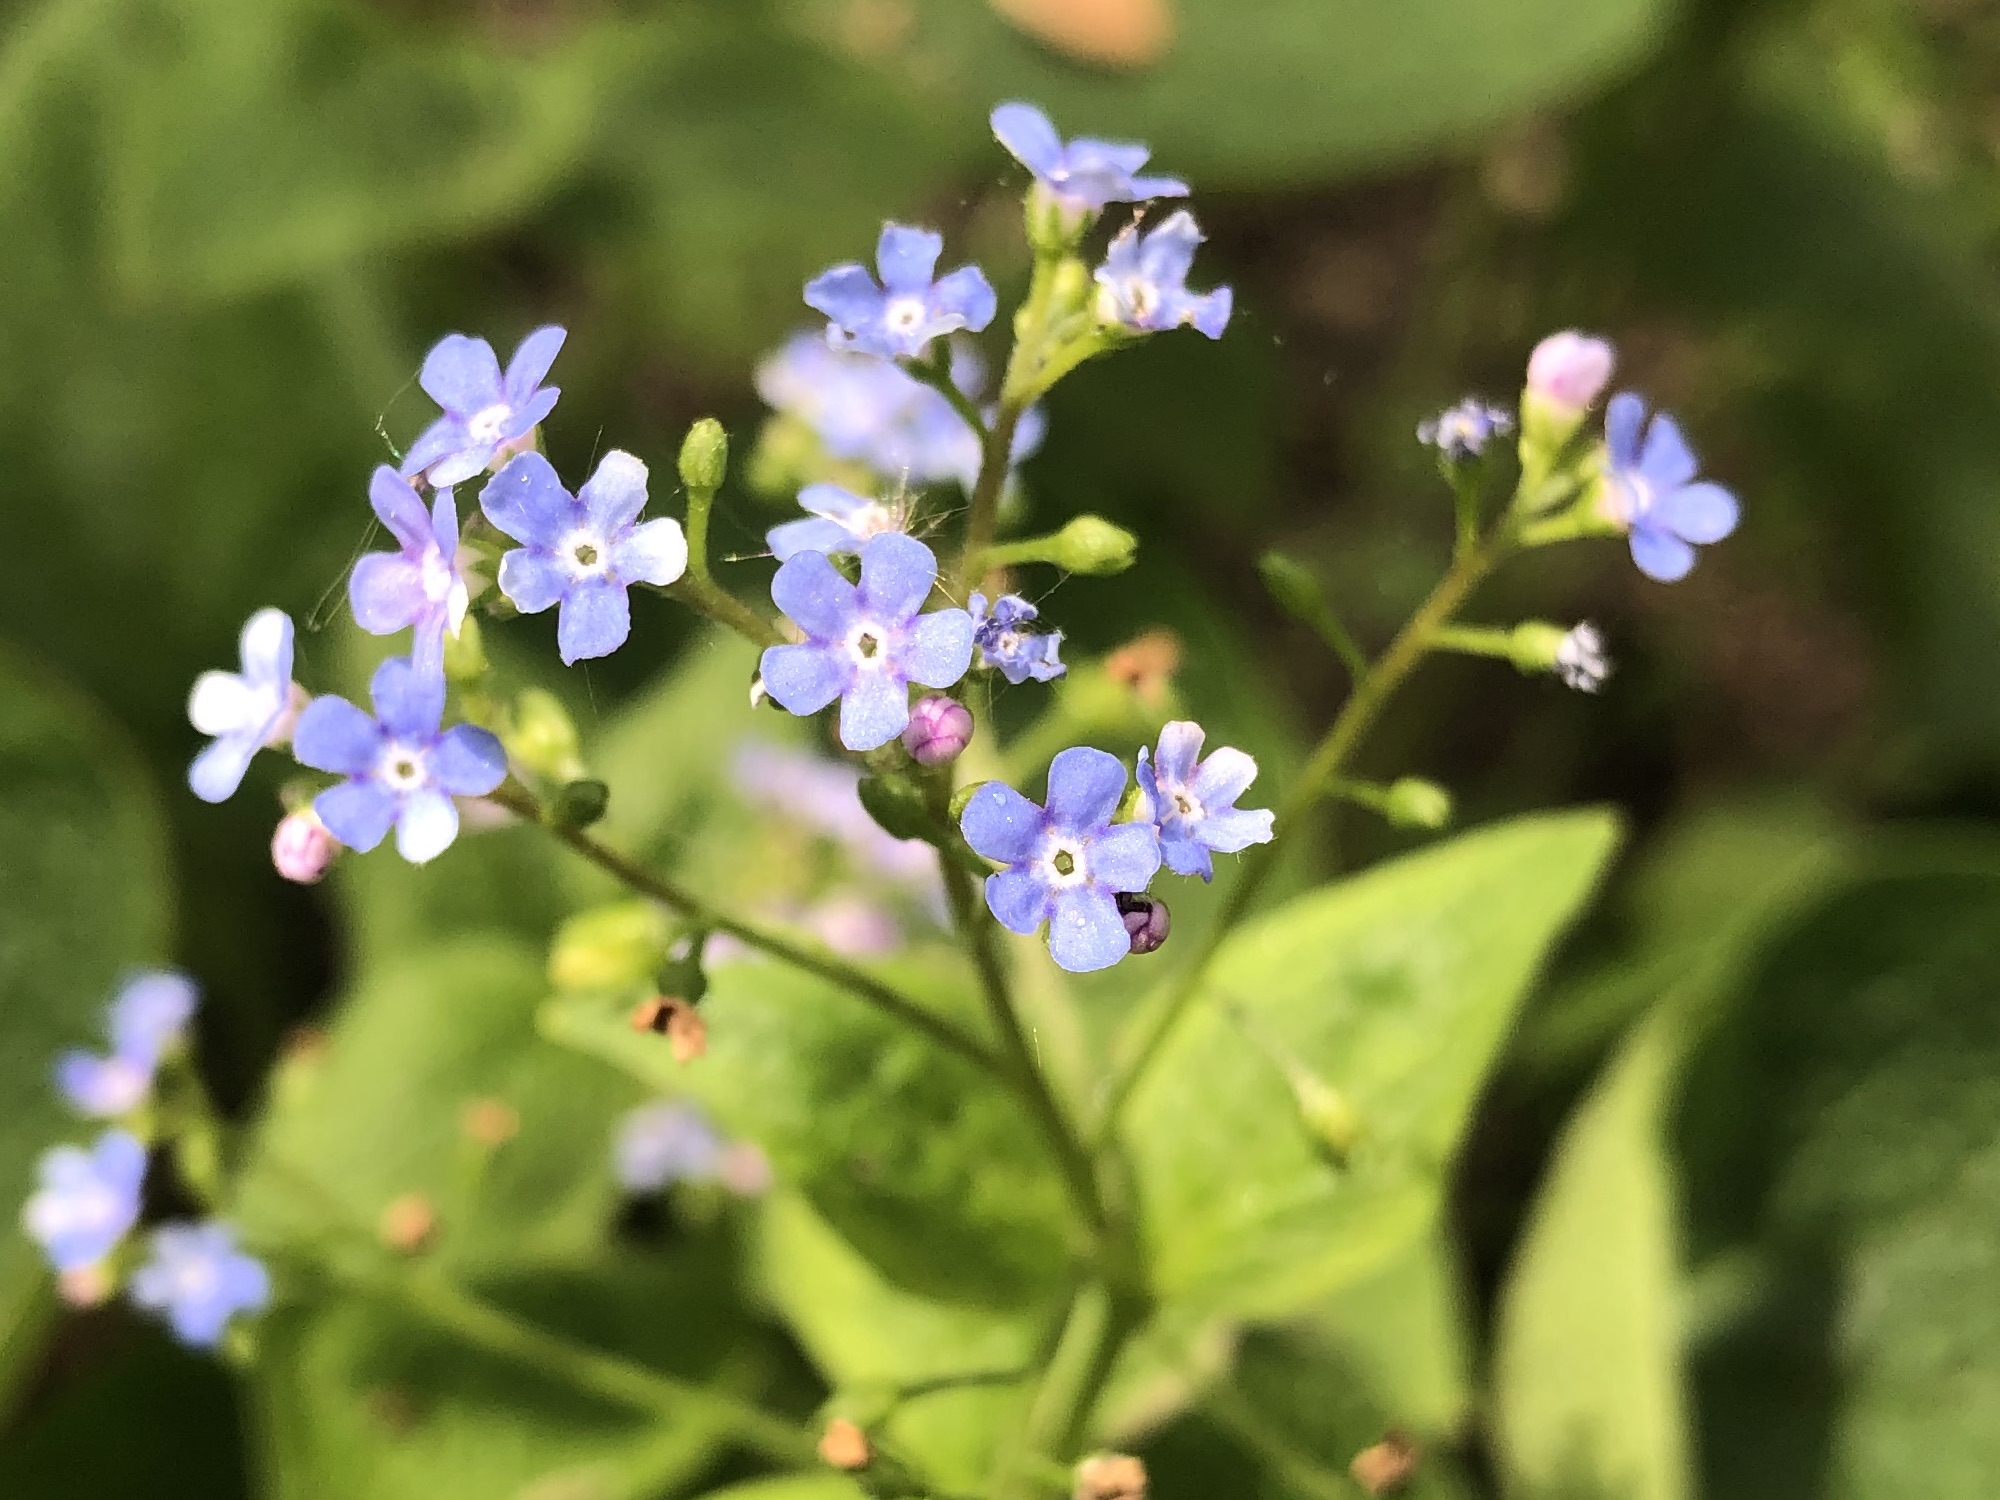 False Forget-Me-Not near Agawa in Madison, Wisconsin on May 23, 2022